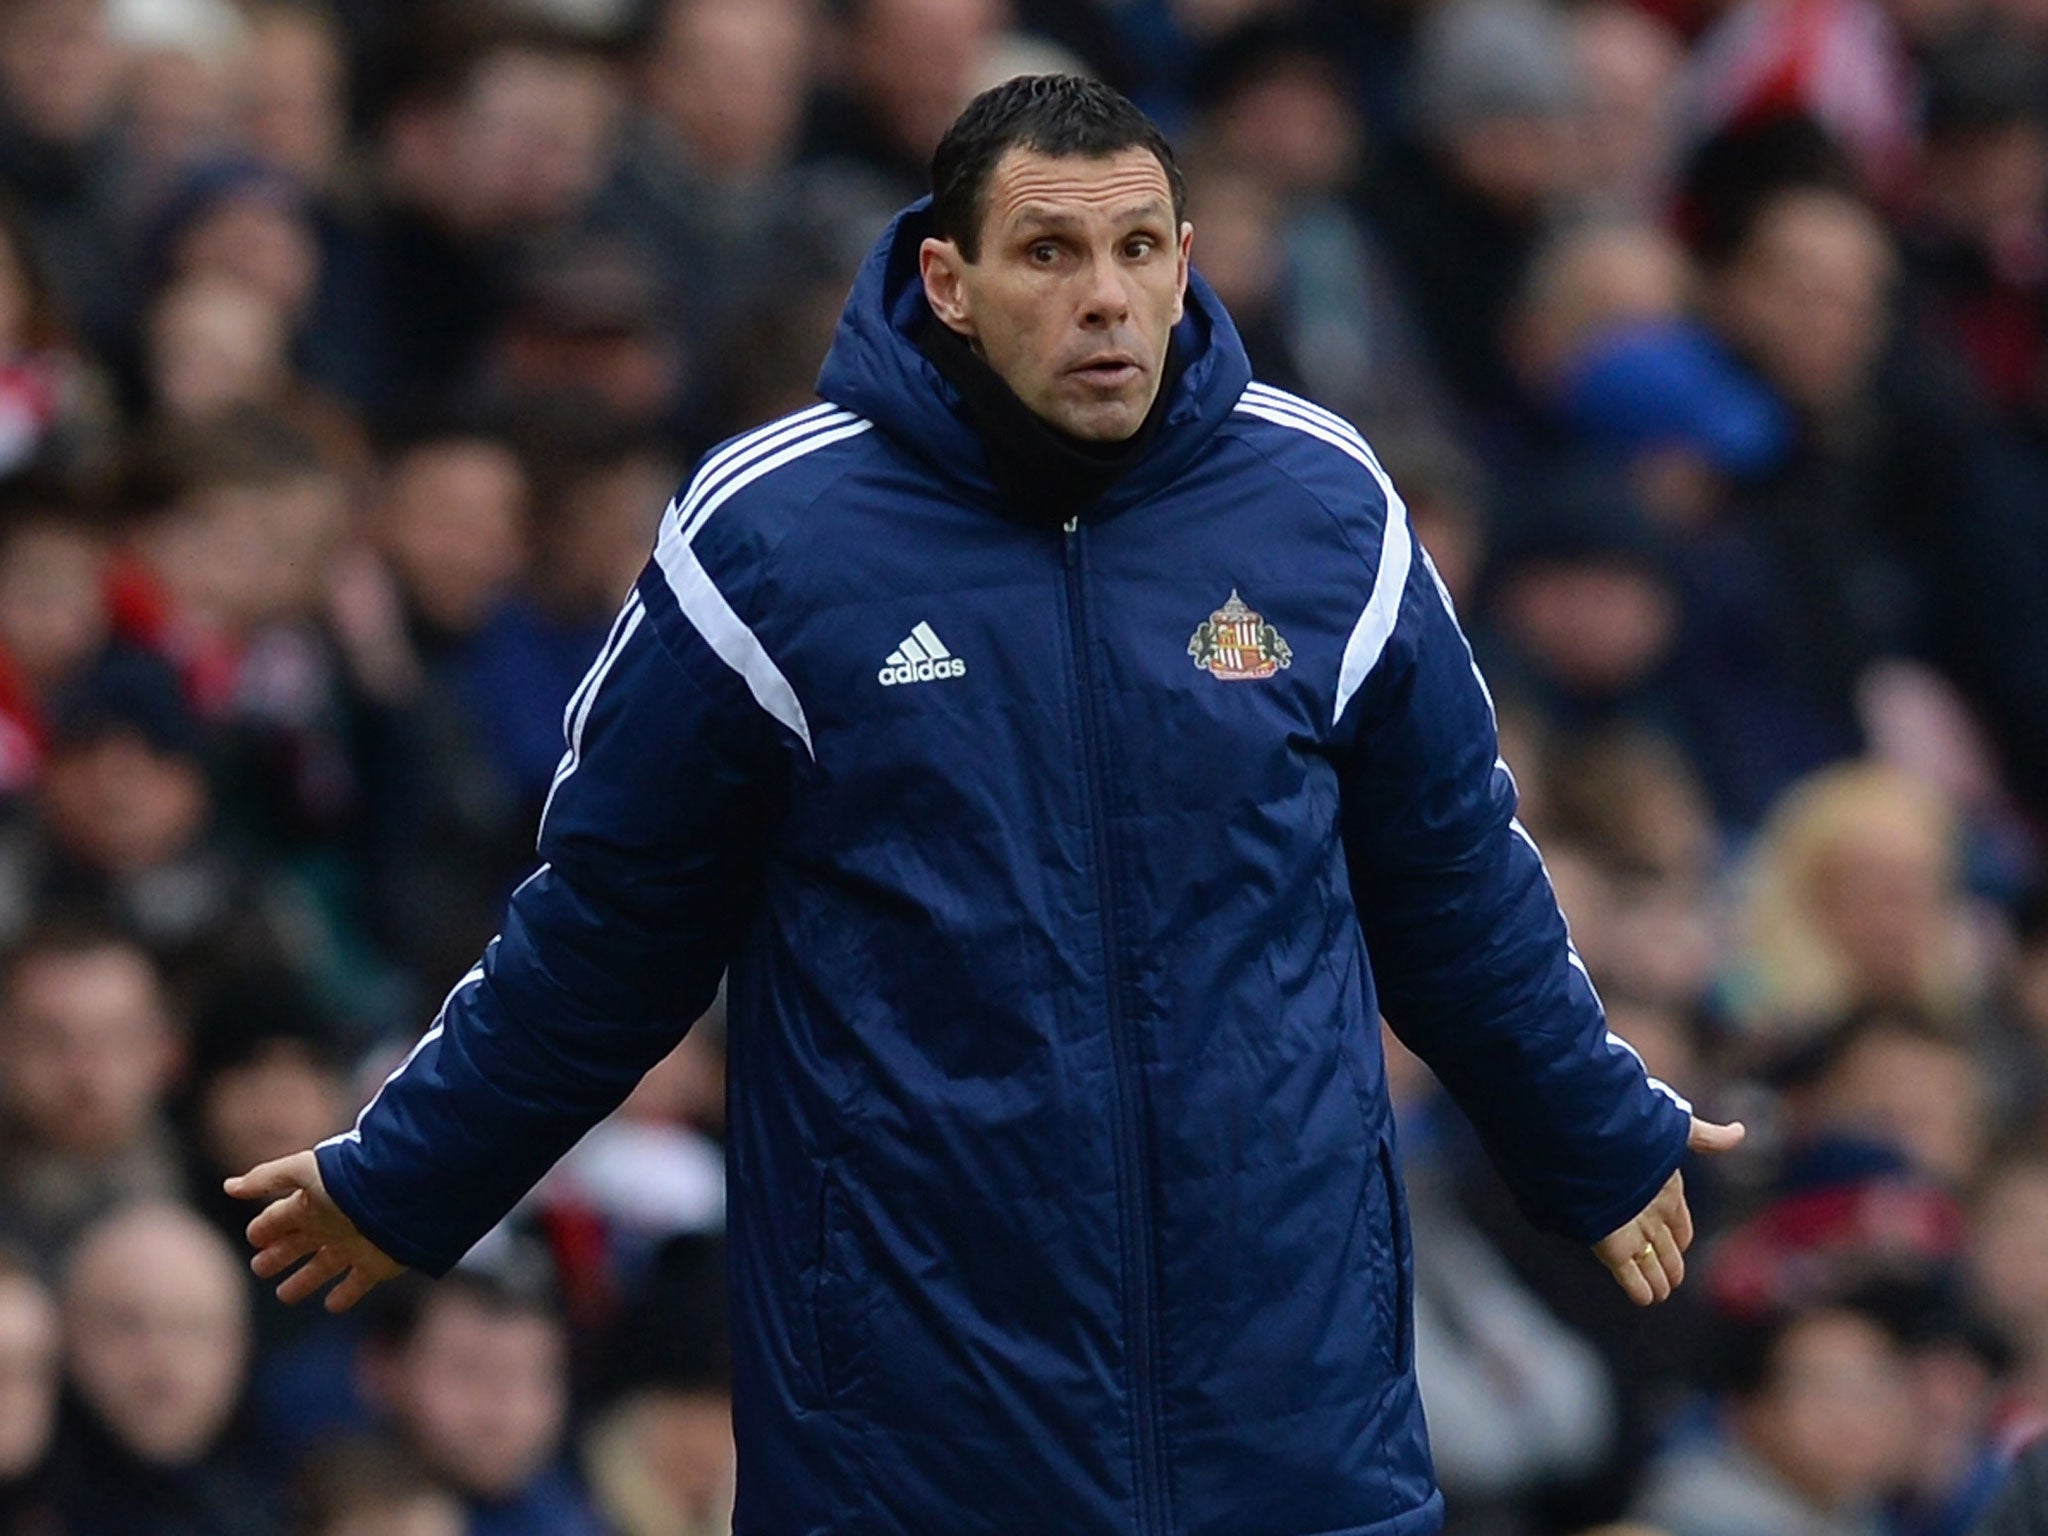 Gus Poyet reacts with dismay as his Sunderland side go down 4-0 at home to Aston Villa